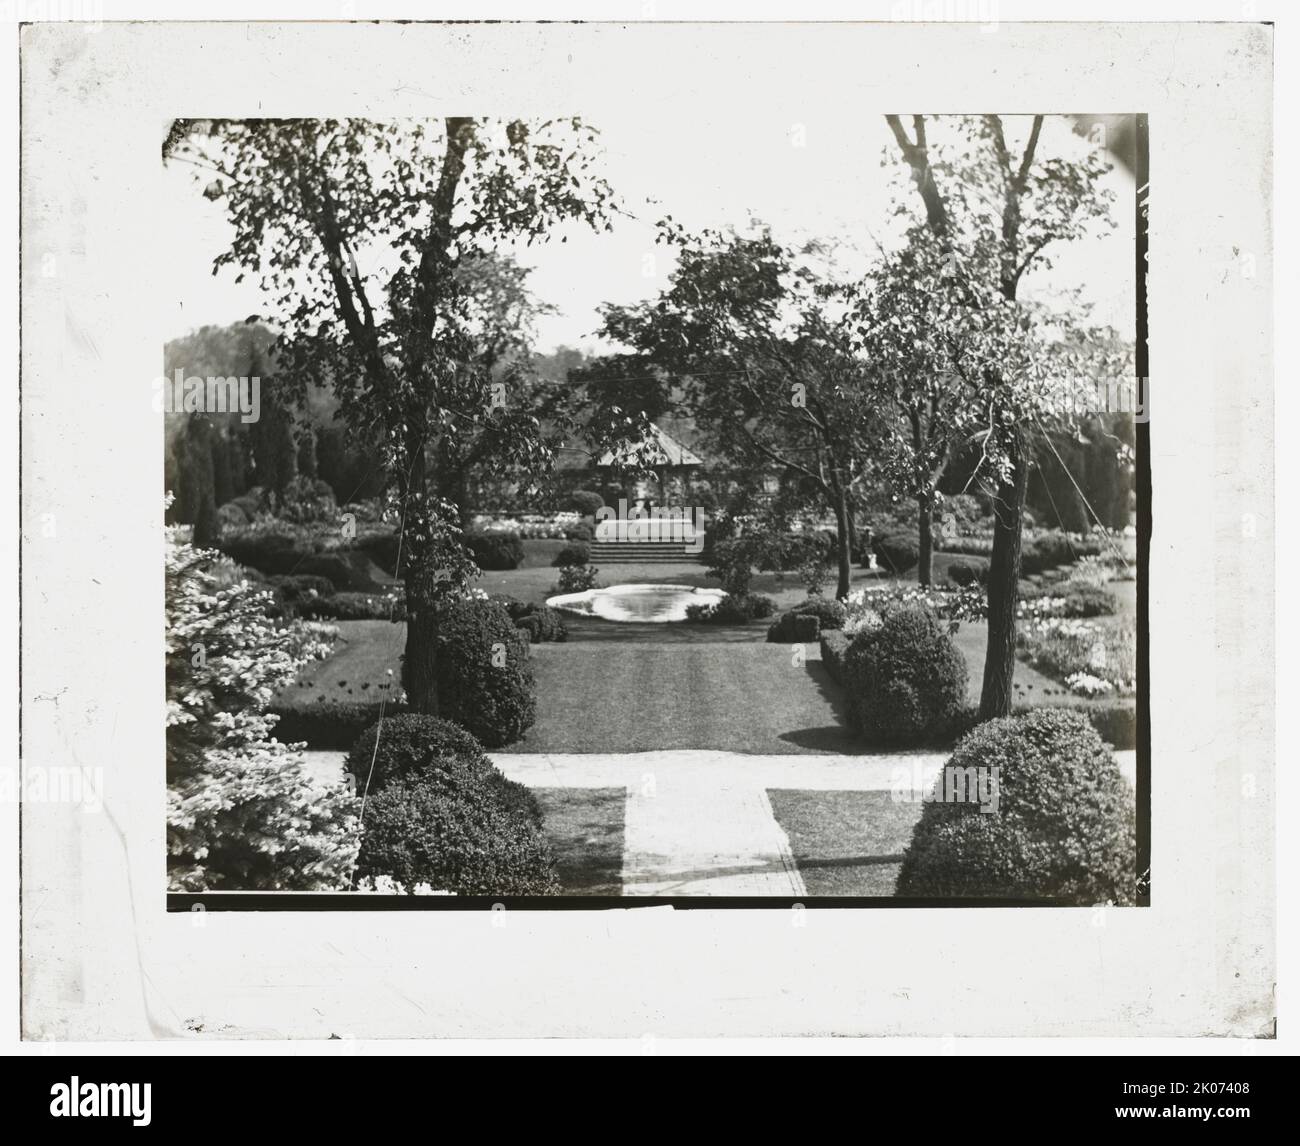 &quot;Killenworth,&quot; George Dupont Pratt house, Glen Cove, New York, c1918. House Architecture: Trowbridge &amp; Ackerman, 1908-1913. Landscape: James Leal Greenleaf, circa 1913. Landscape: Site and drive planning in &quot;Dosoris,&quot; the Pratt family compound with houses belonging to the children of Charles Pratt, Frederick Law Olmsted Jr., and Olmsted Brothers, 1906. Stock Photo